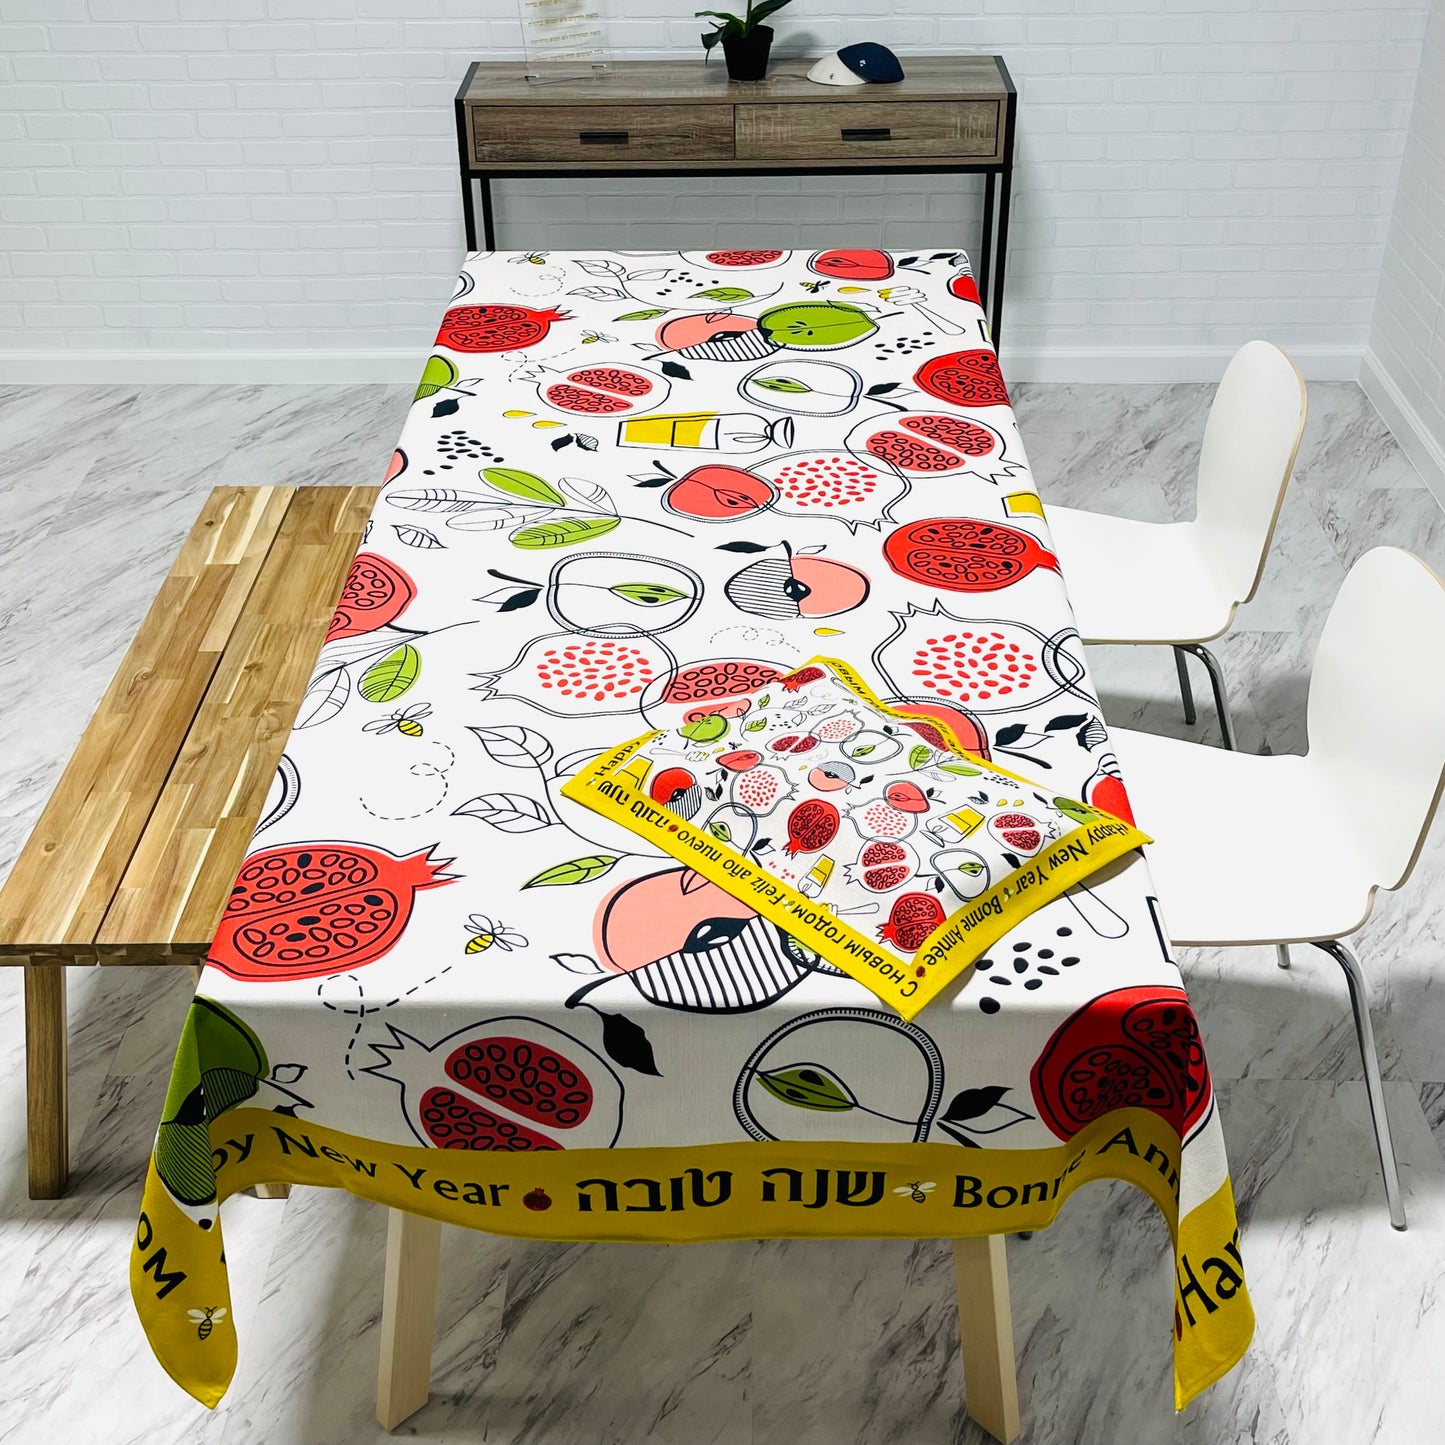 Pomegranate Tablecloth. FREE Matching Challah Cover!